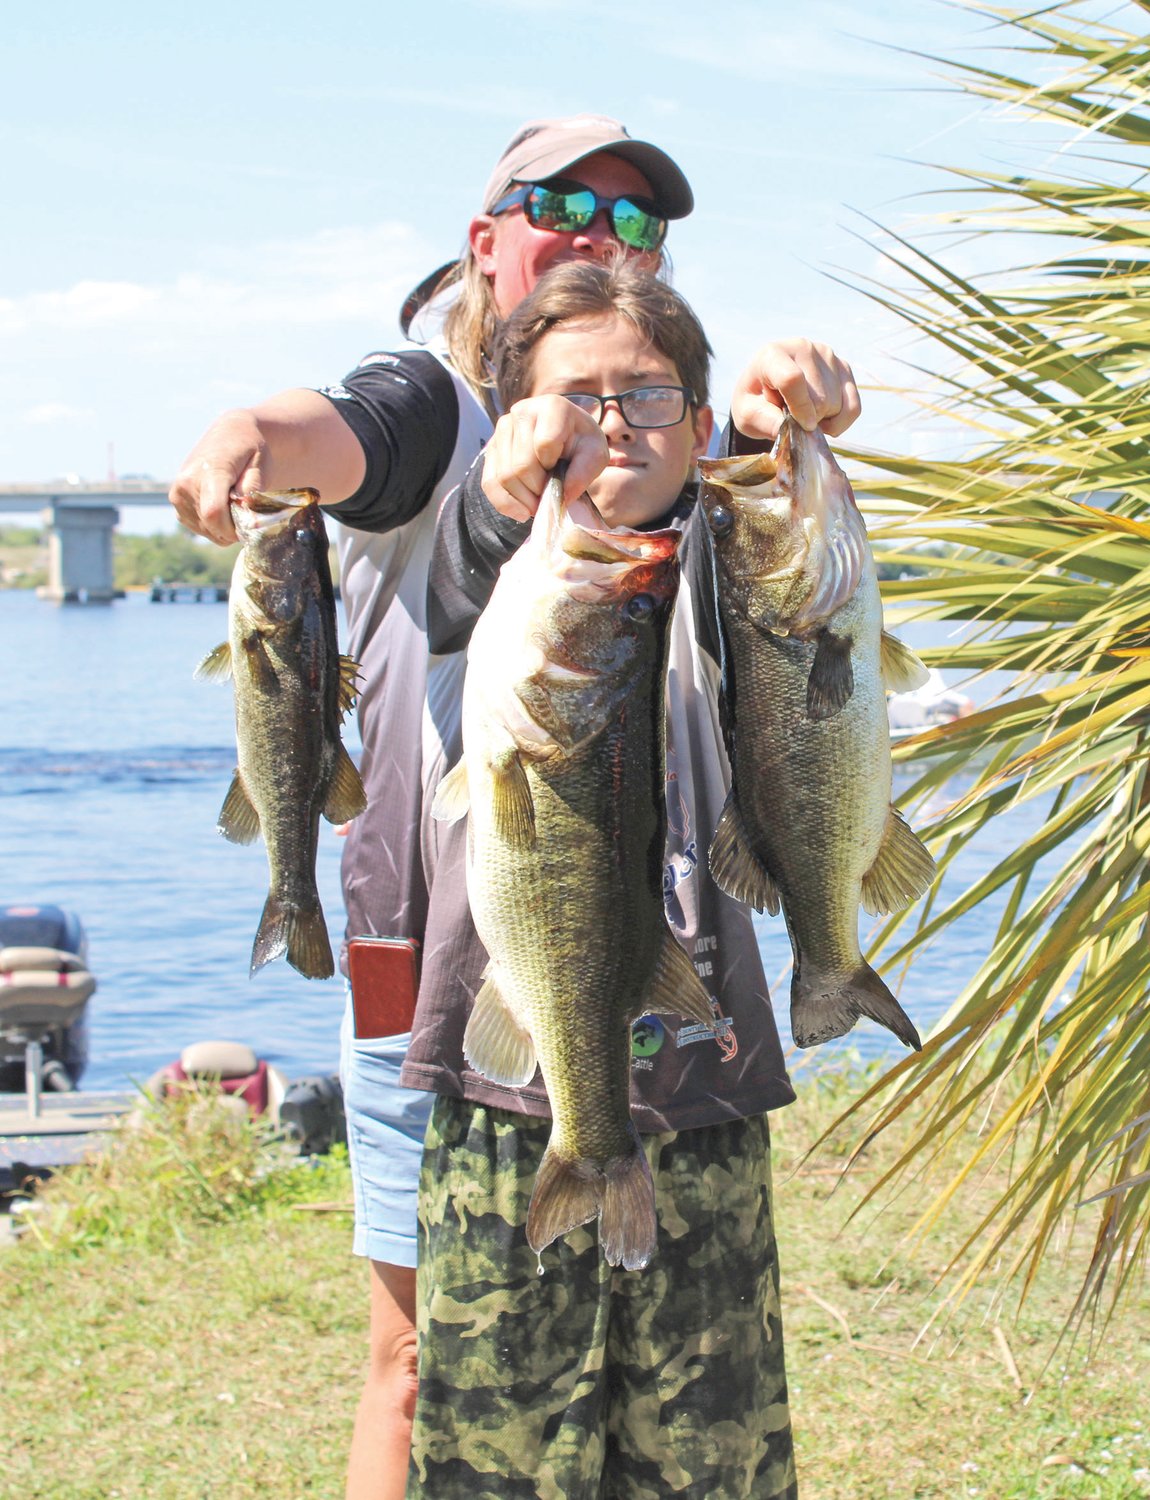 First place winner in the 9-13 age group was Derrick Steinmetz with 8.43 pounds and big fish weighing 4.76 pounds.